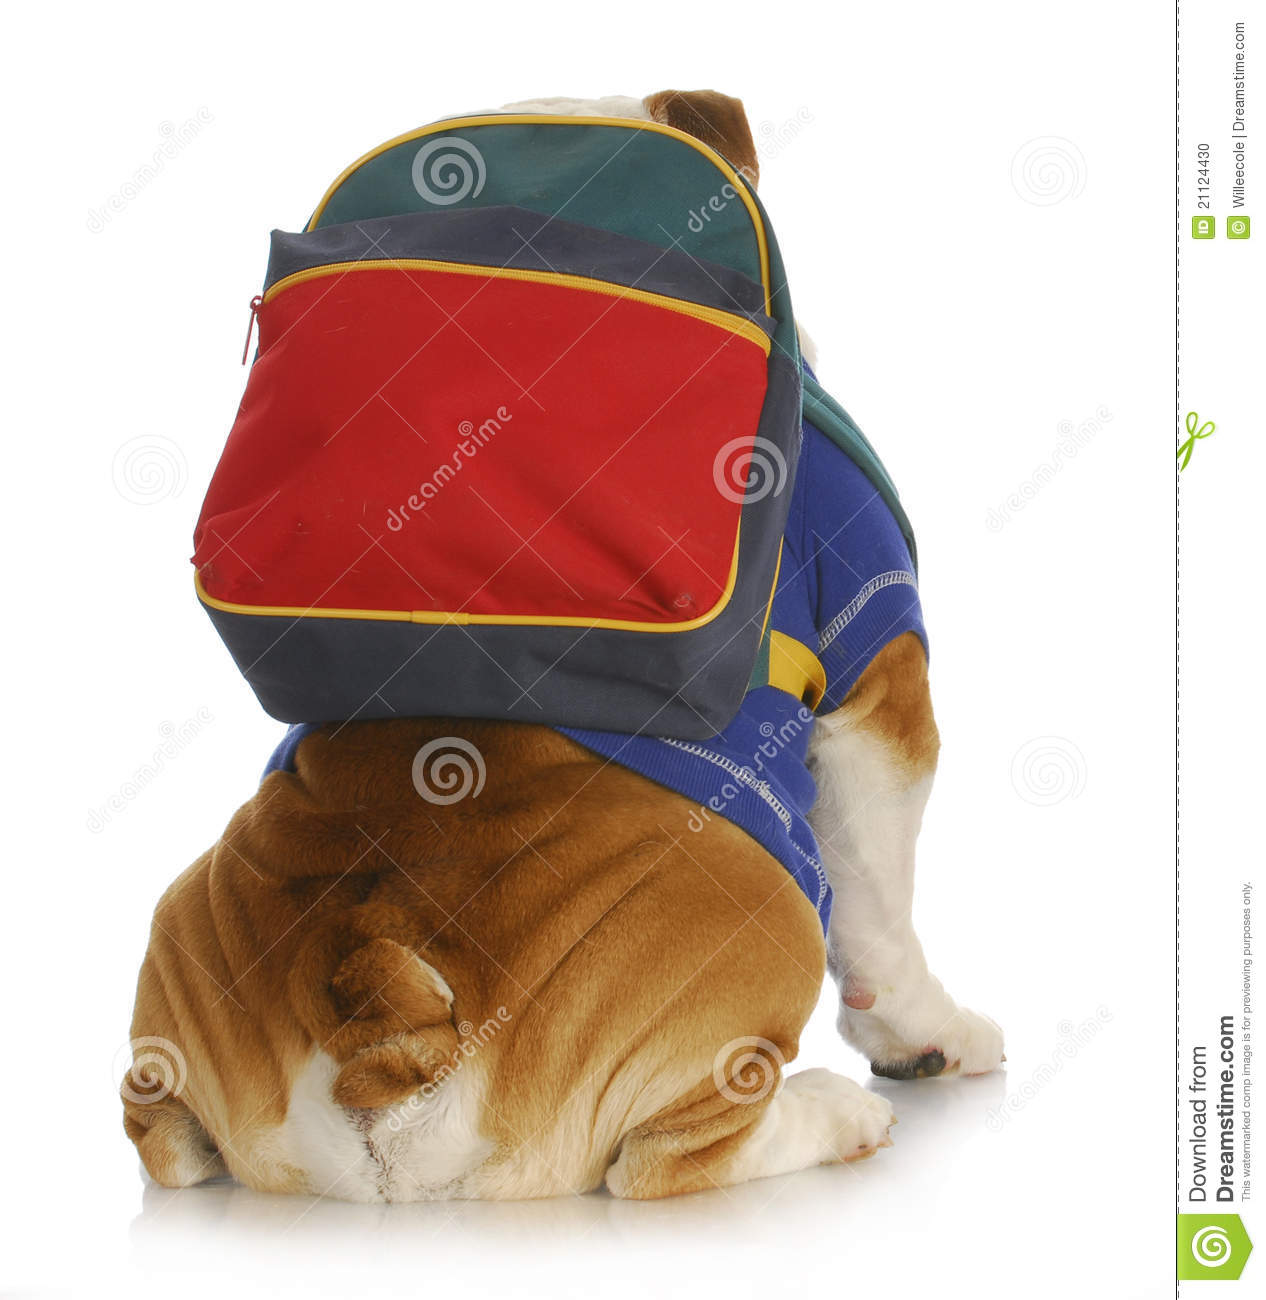 Dog Obedience School   English Bulldog With Back To Viewer Wearing    